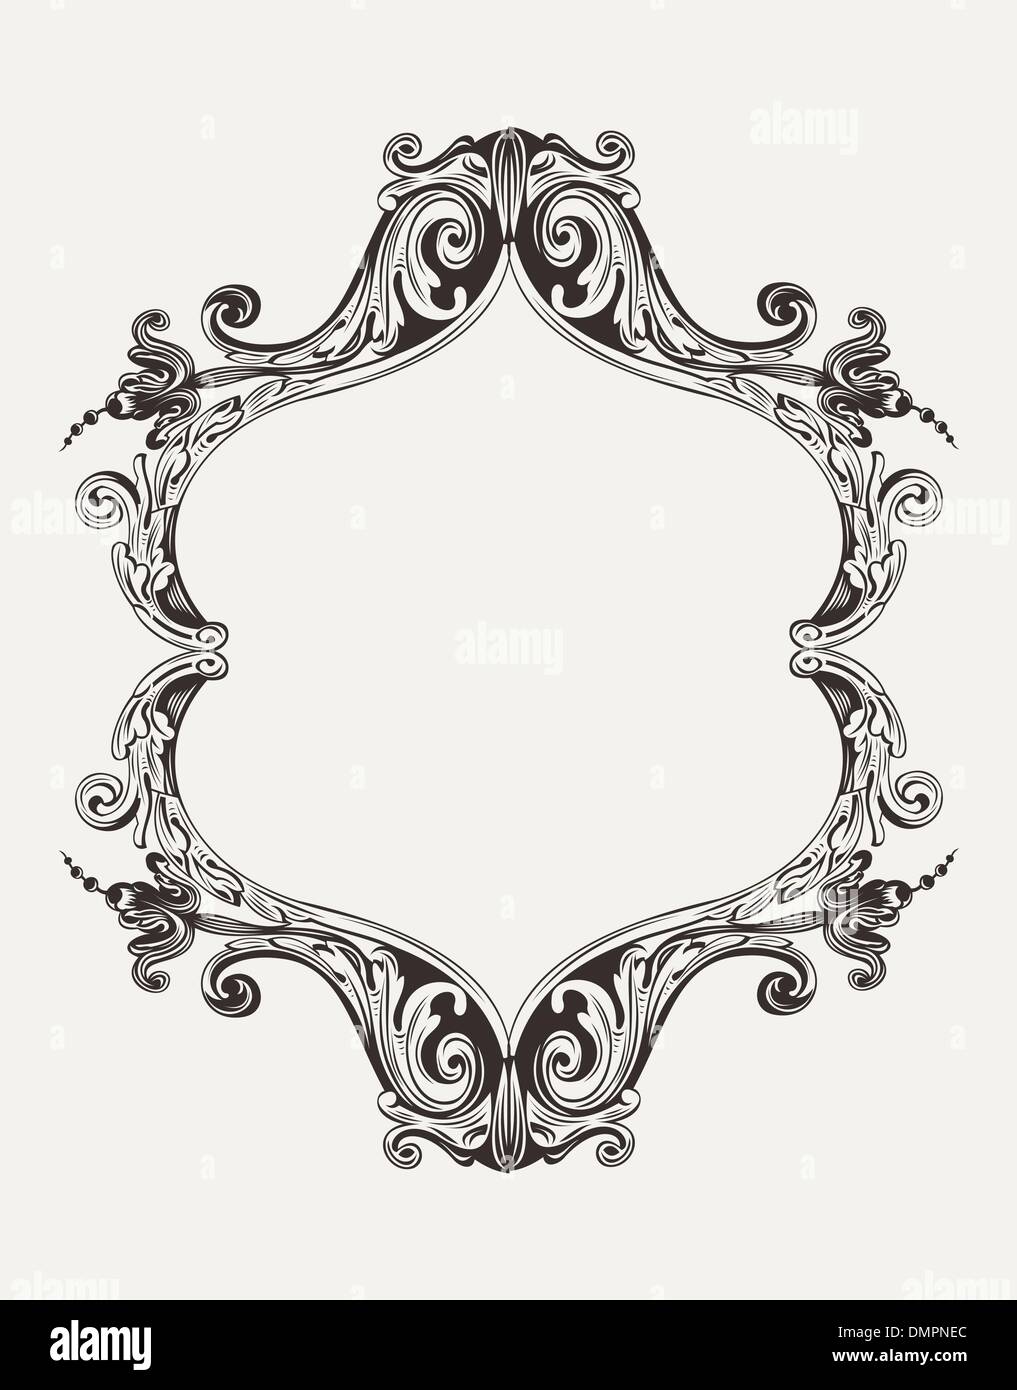 Royal frame Stock Vector Images - Alamy